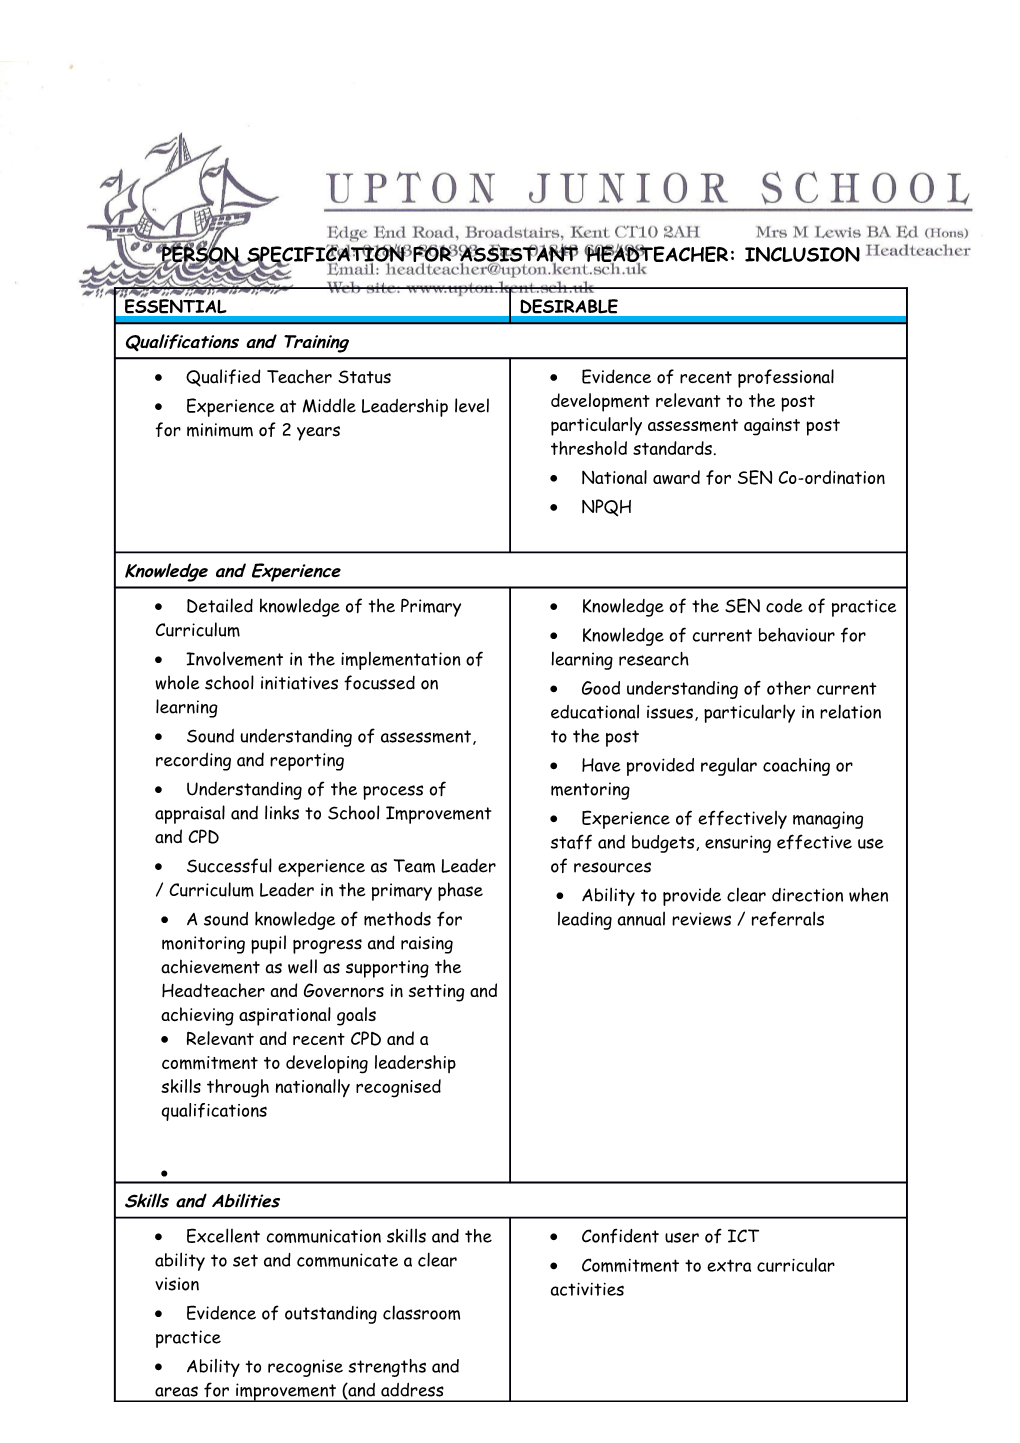 Person Specification for Assistant Headteacher: Inclusion